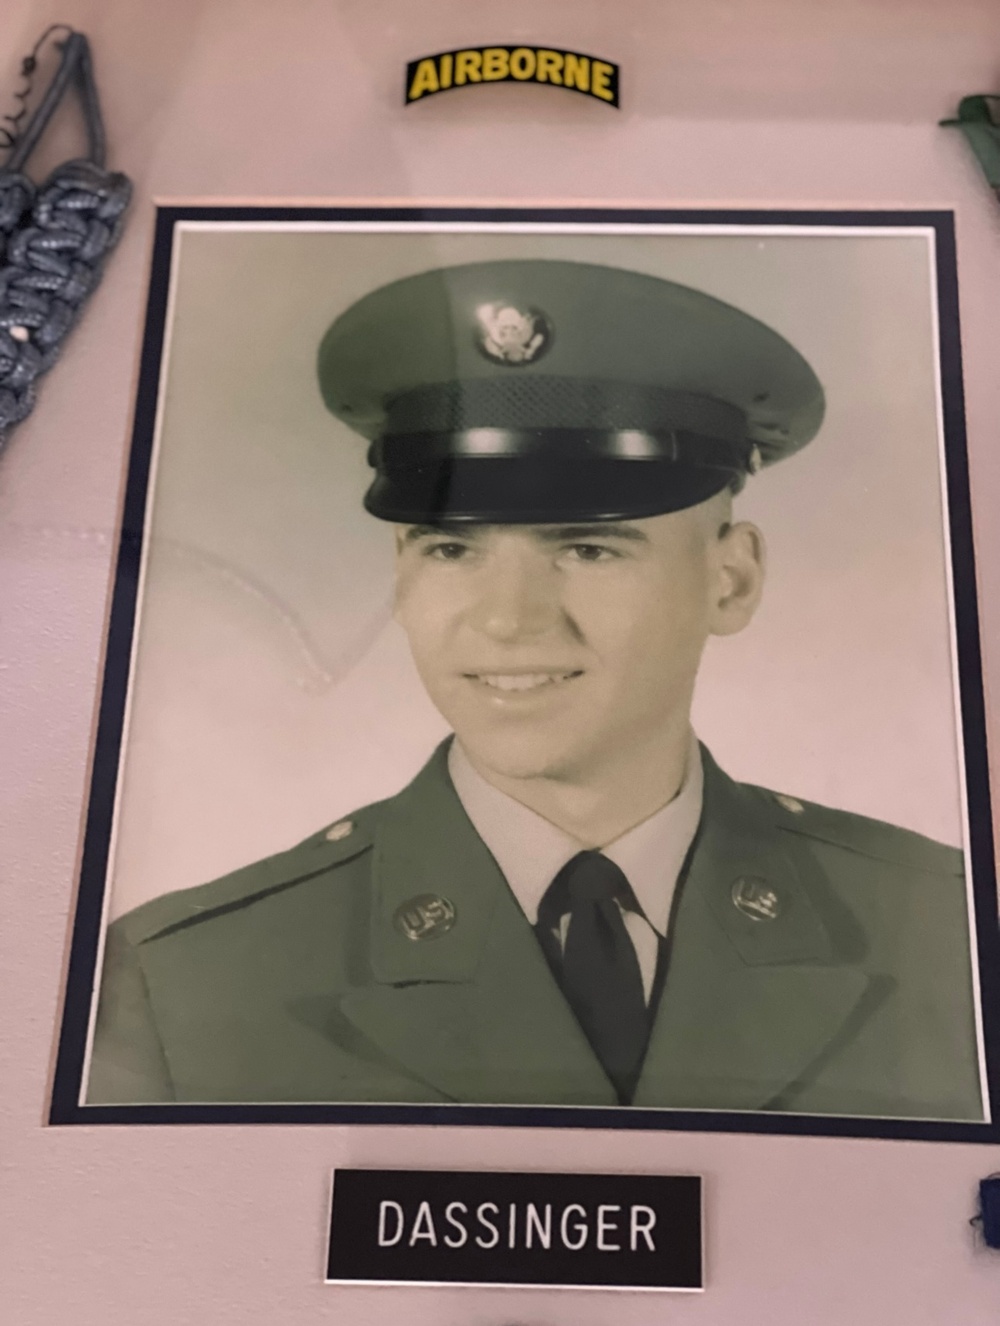 Denver Family Has Ashes of Vietnam Veteran Spread by U.S. Paratrooper Jumping From Military Aircraft